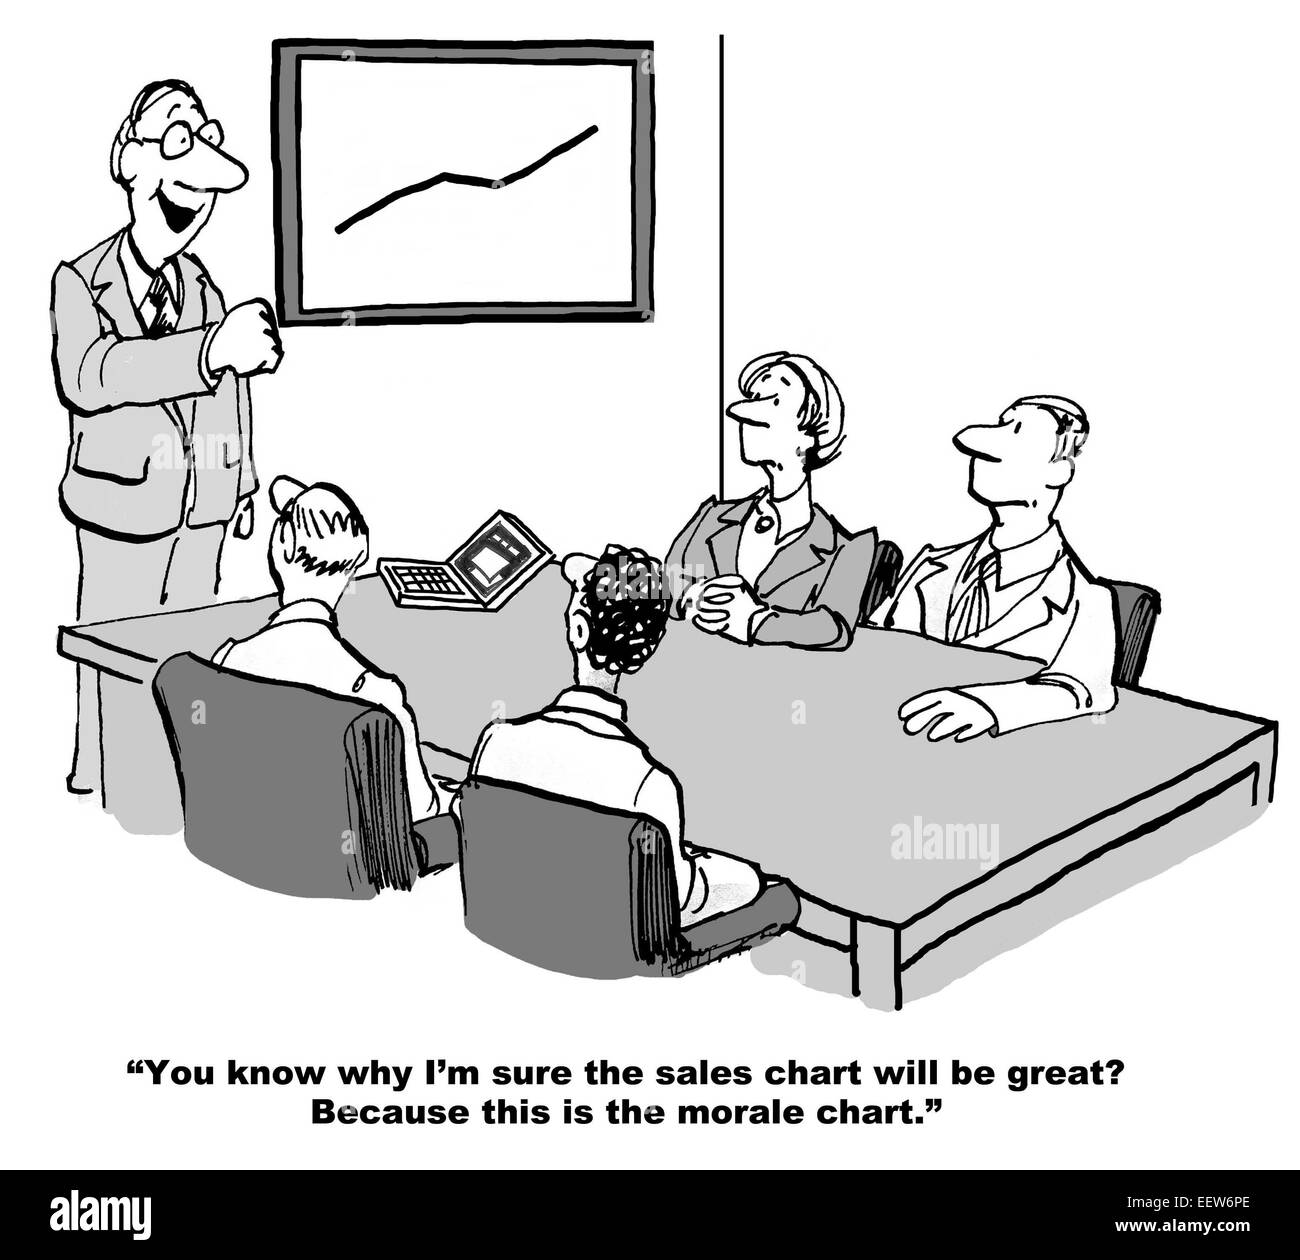 Cartoon of business meeting and leader is saying sales will grow because company morale is up. Stock Photo